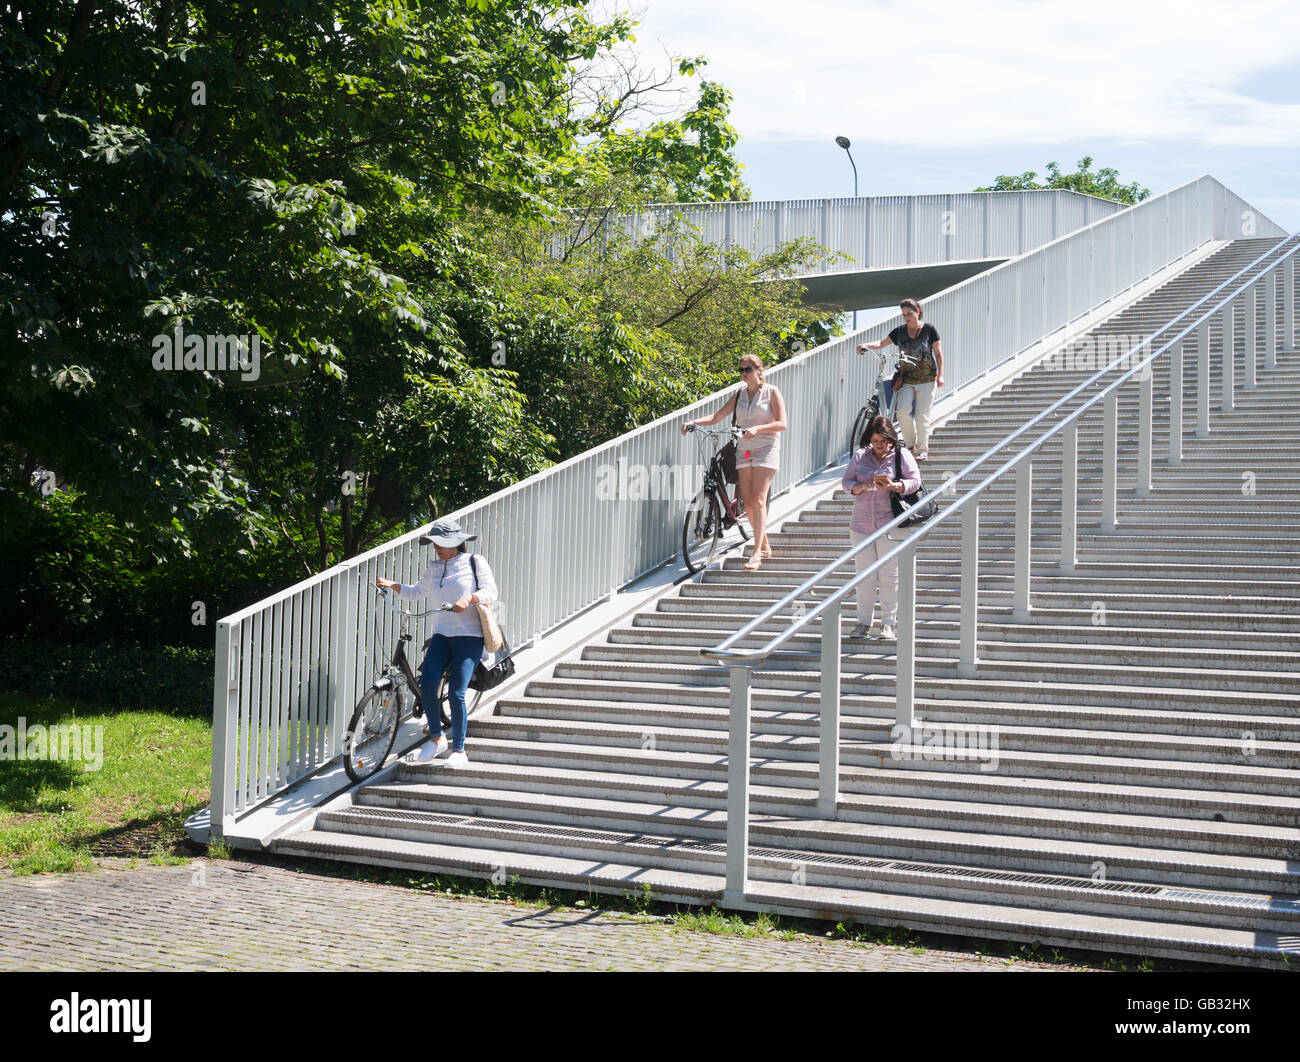 Three young women wheeling bicycles down a runnel or gutter on steps from bridge, Maastricht, Holland, Europe Stock Photo